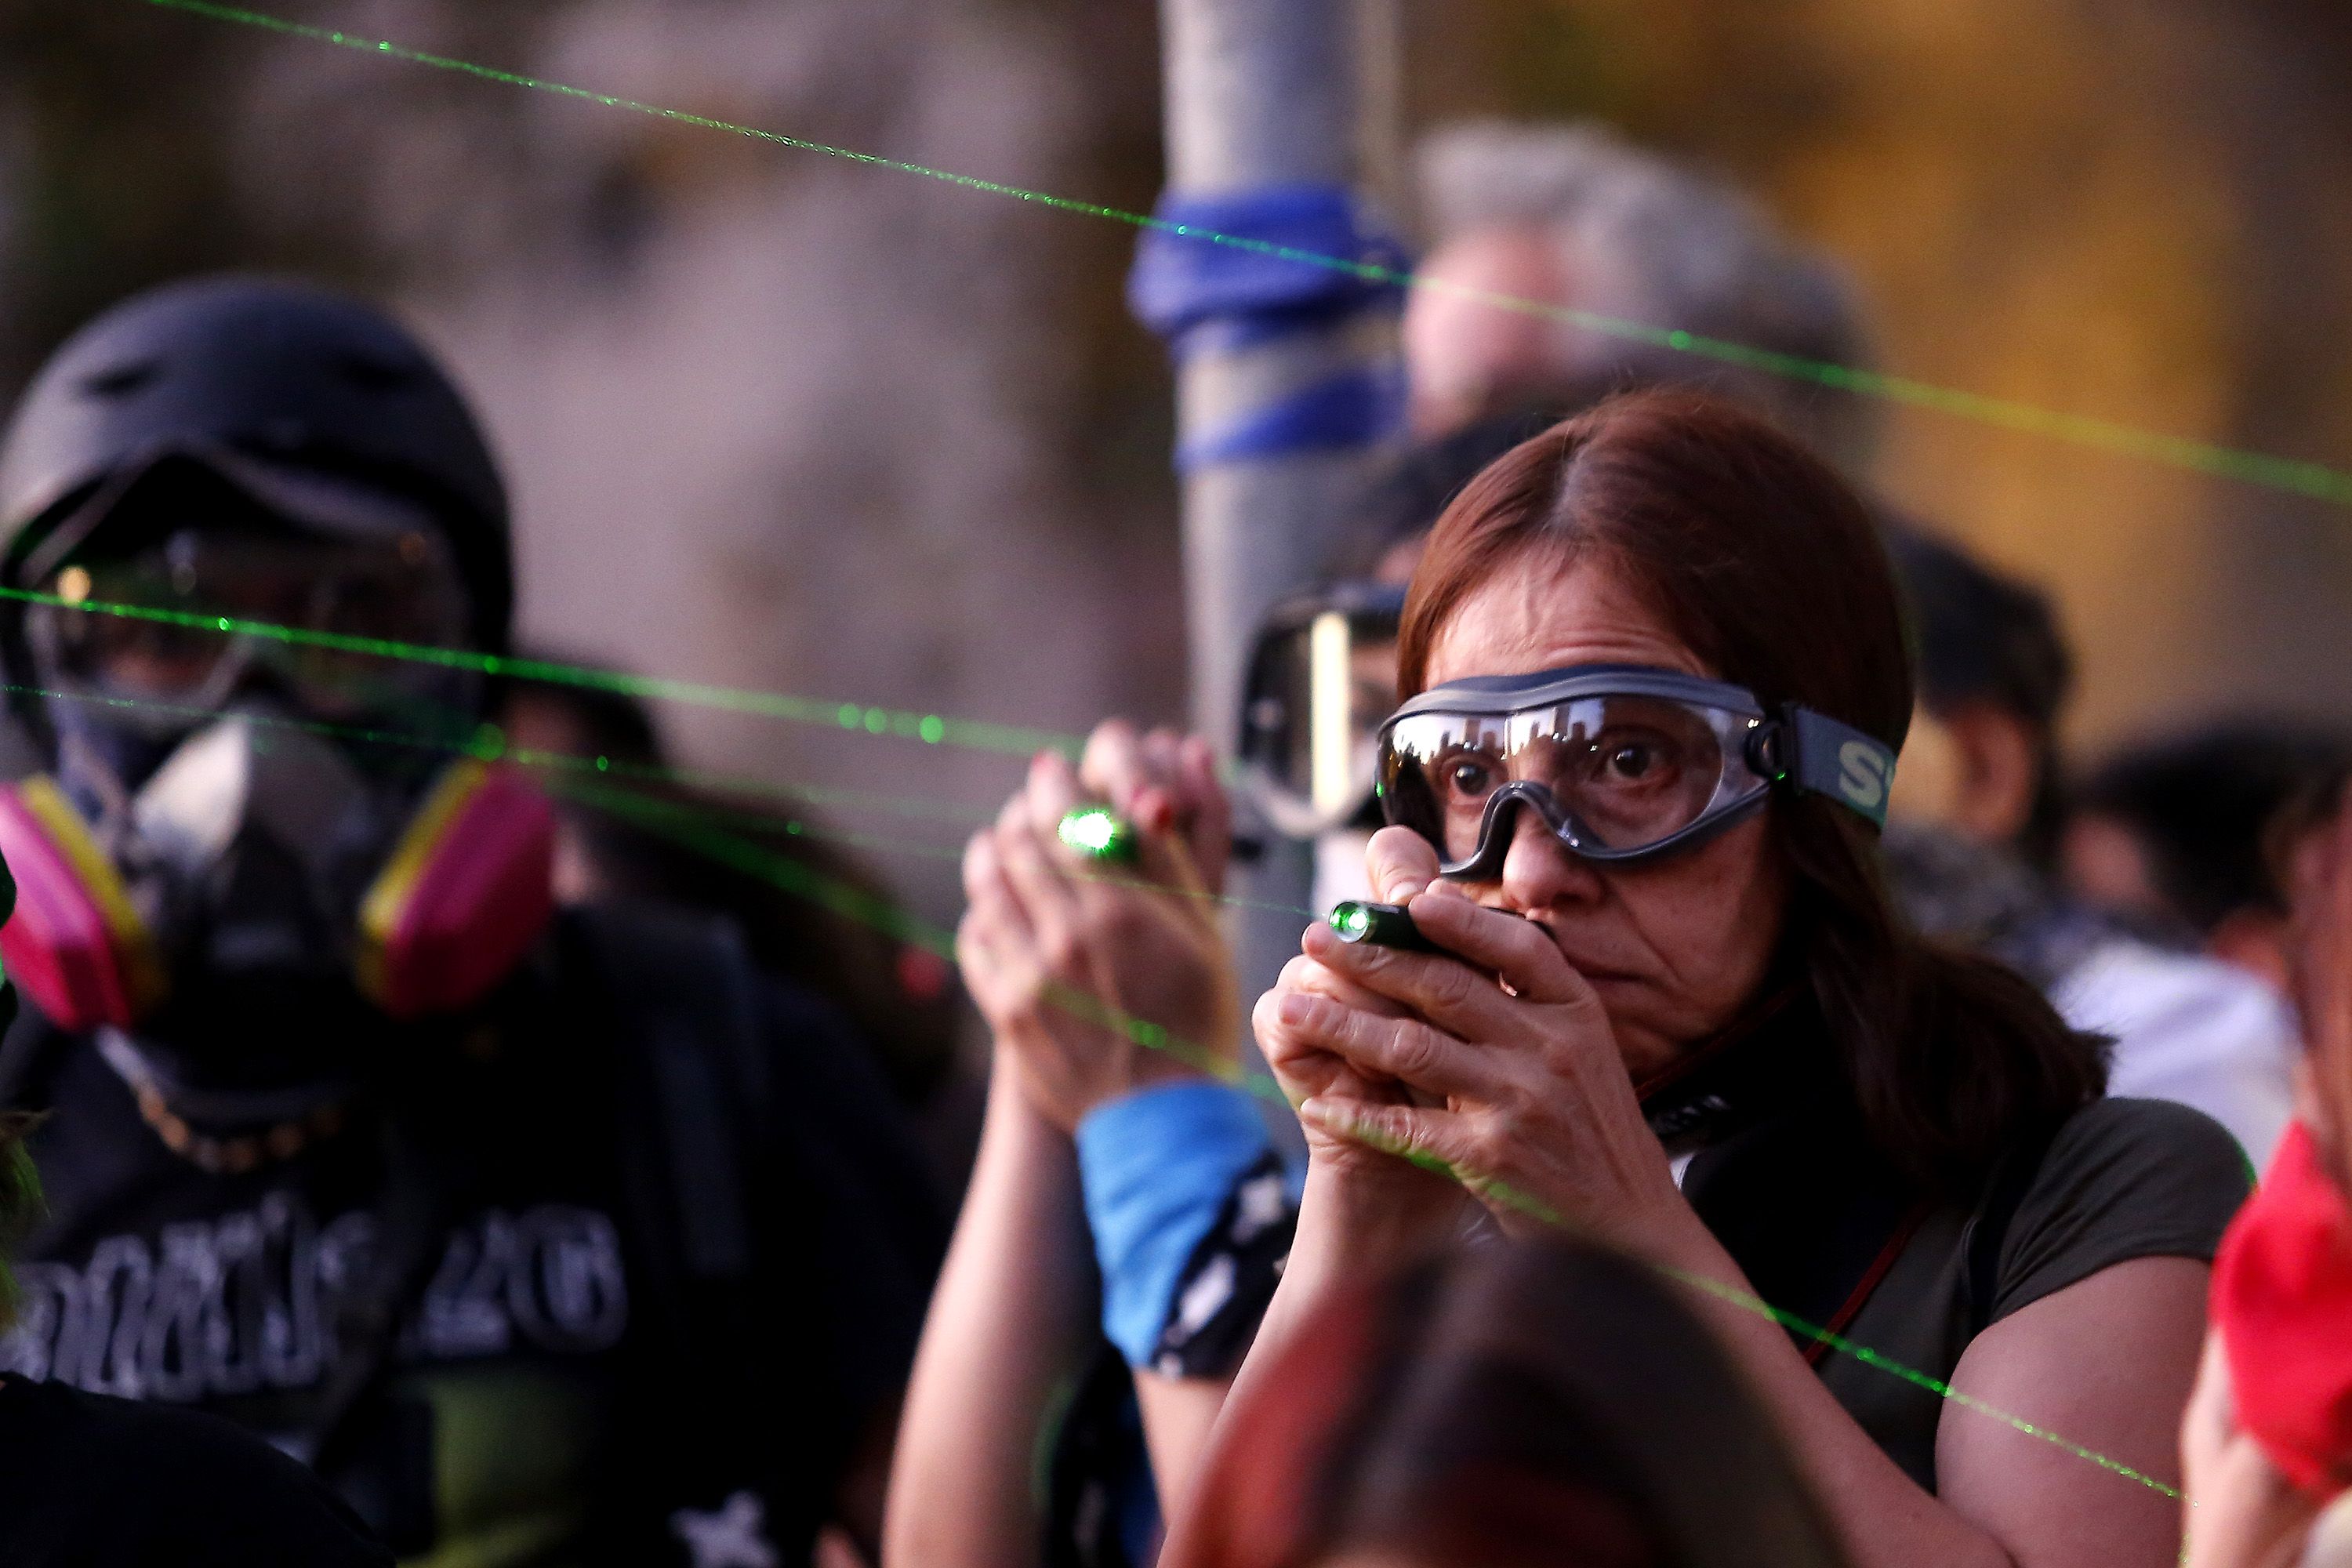 In this image, a woman points a laser at police while wearing safety goggles